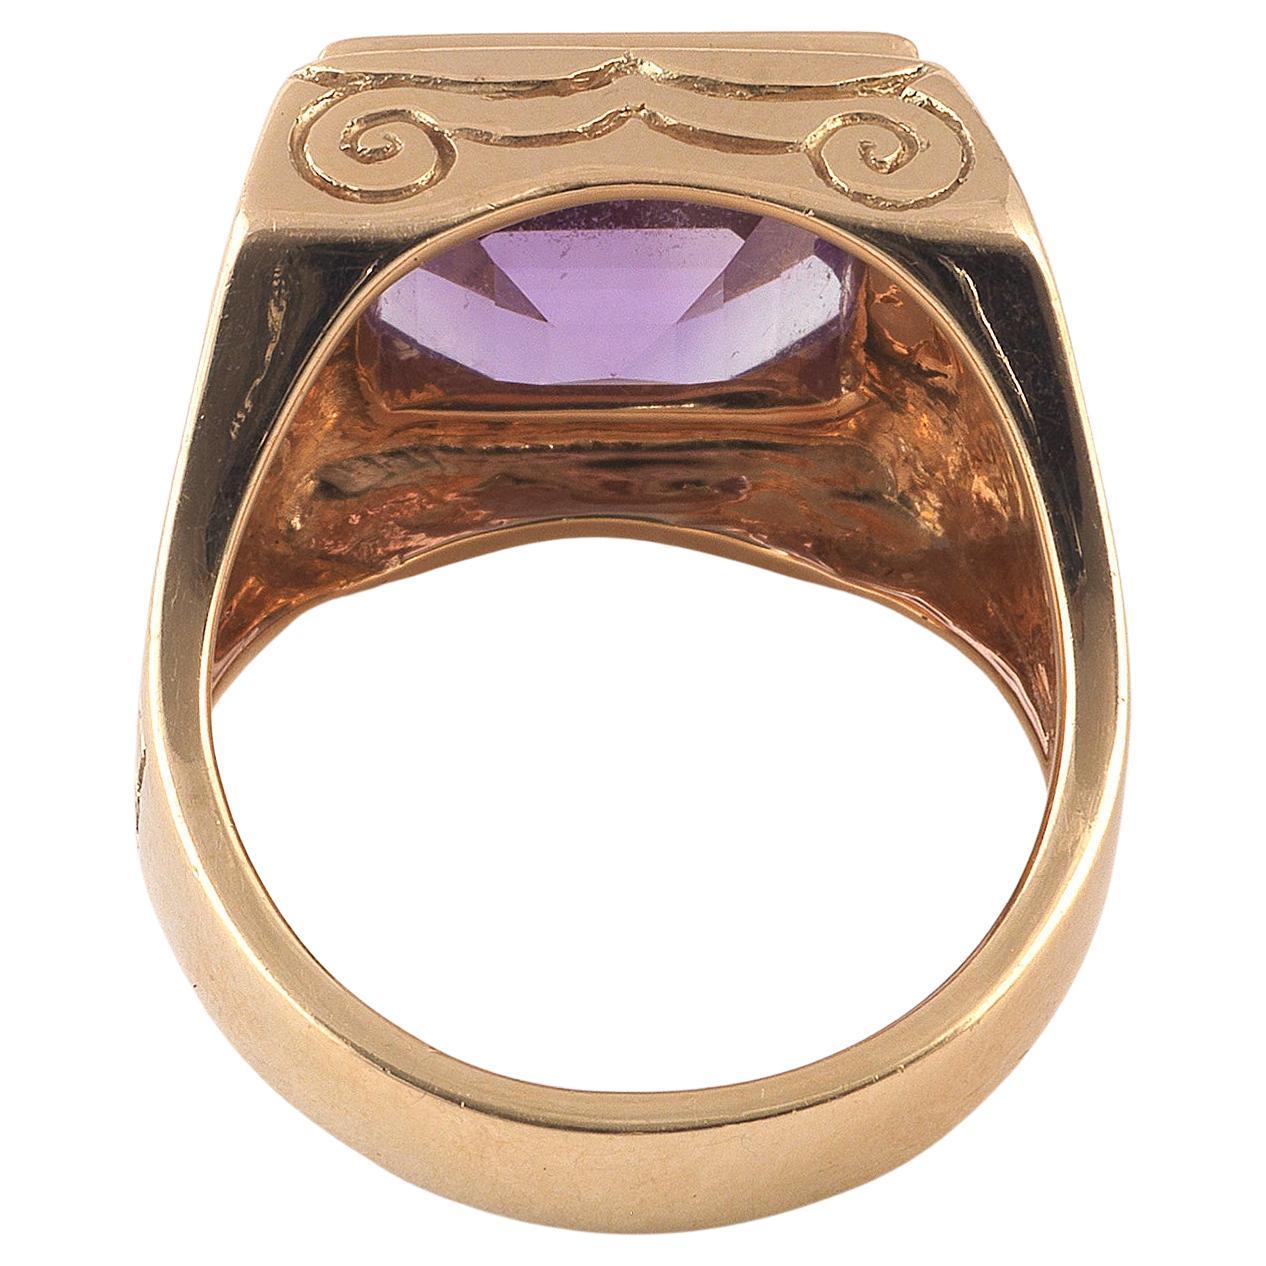 
Square cut amethyst mounted 18kt gold and the shank engraved with religious symbols

Size 10

Weight: 22,3gr.